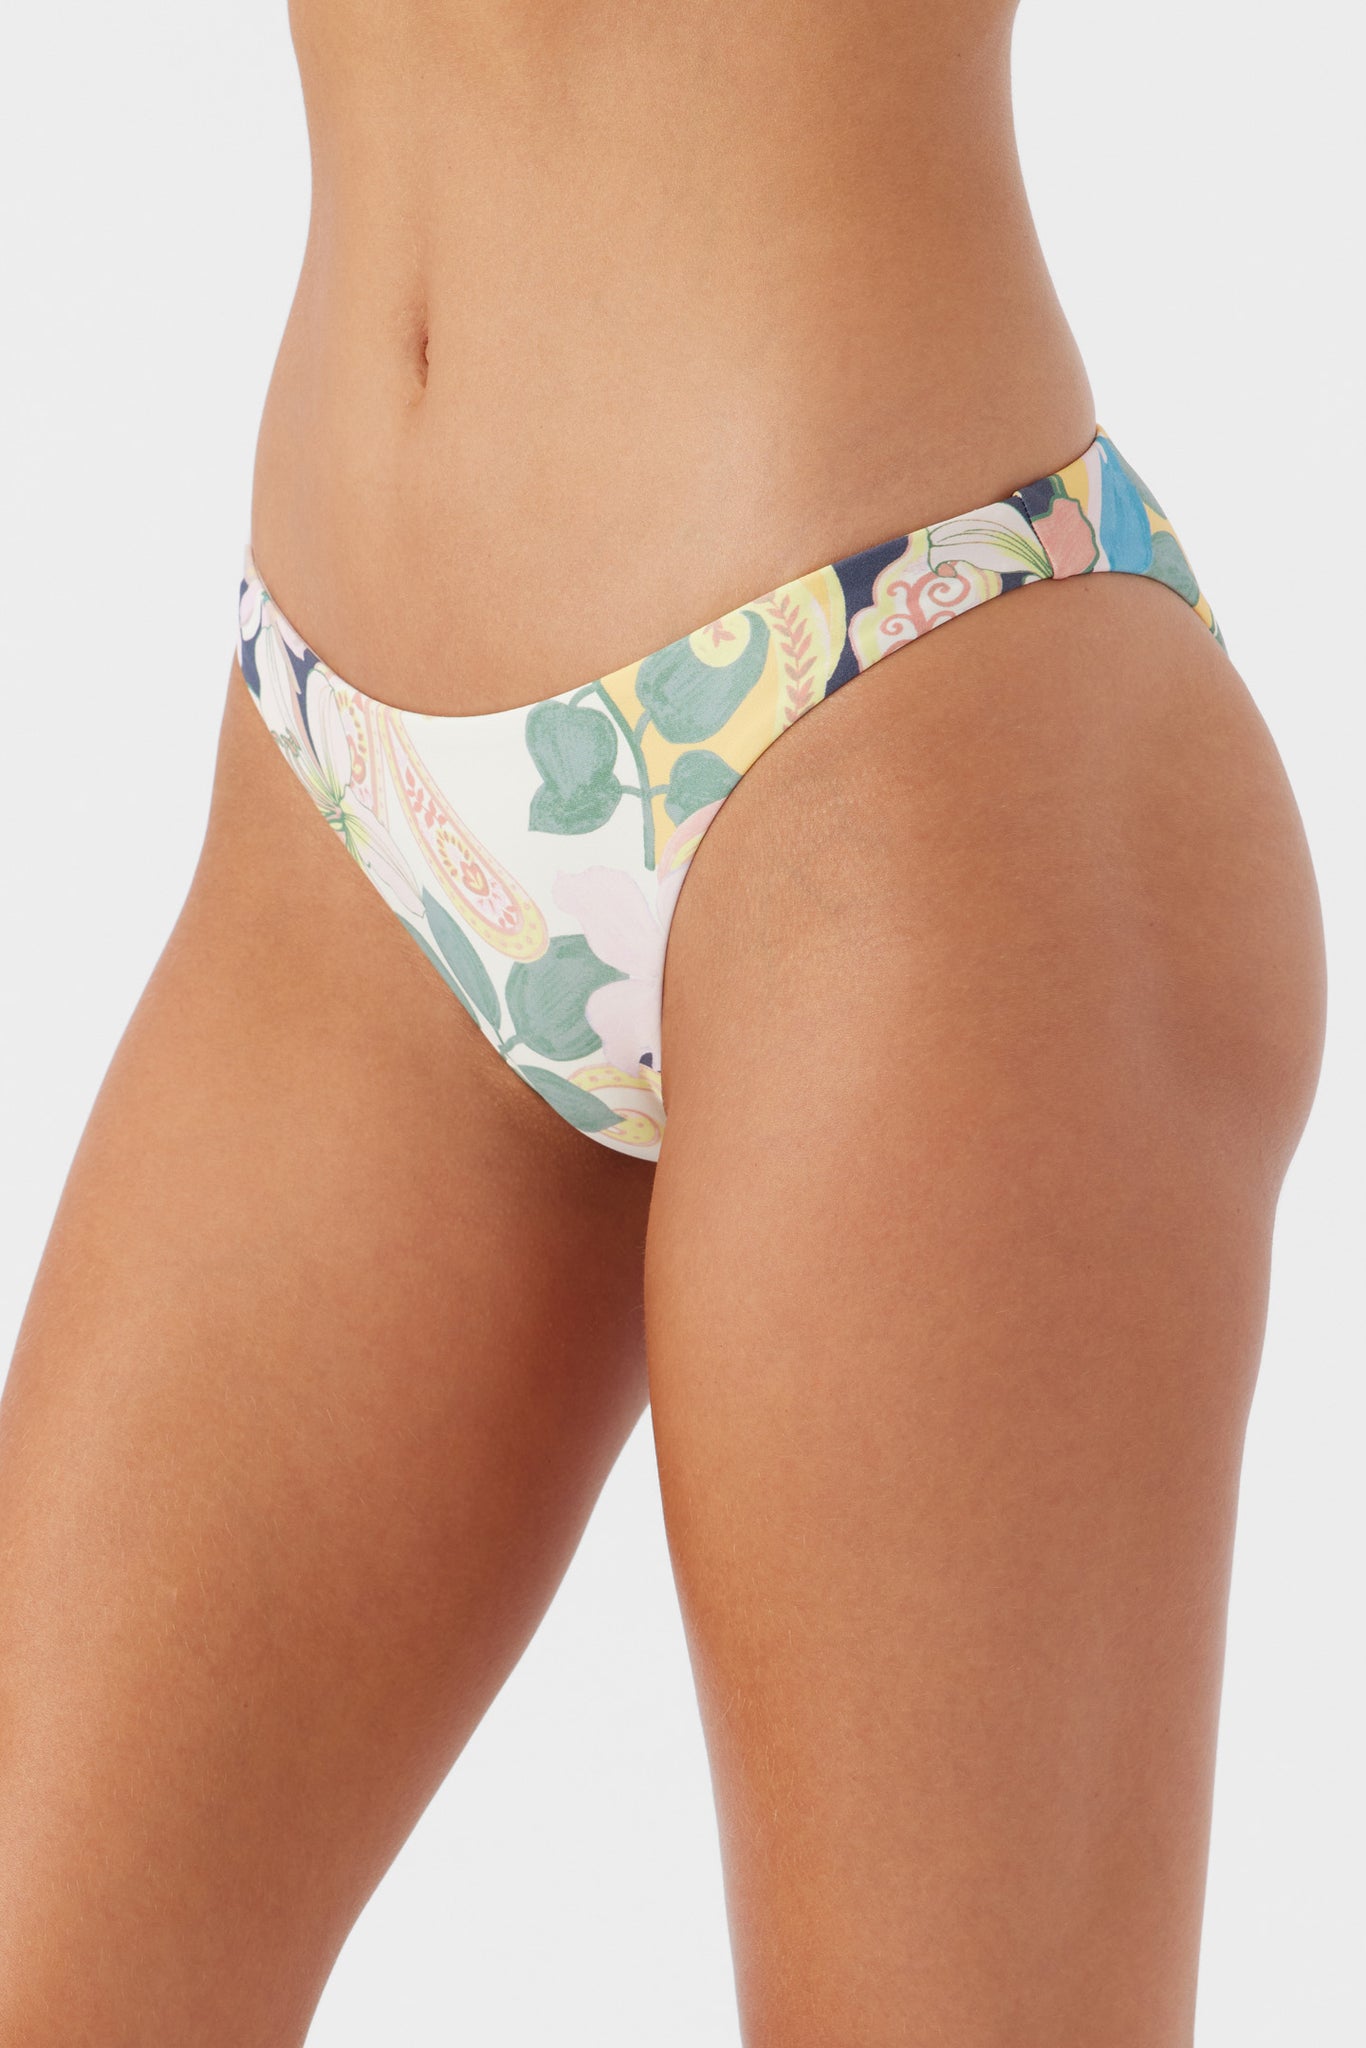 MADISON FLORAL FLAMENCO CHEEKY BOTTOMS